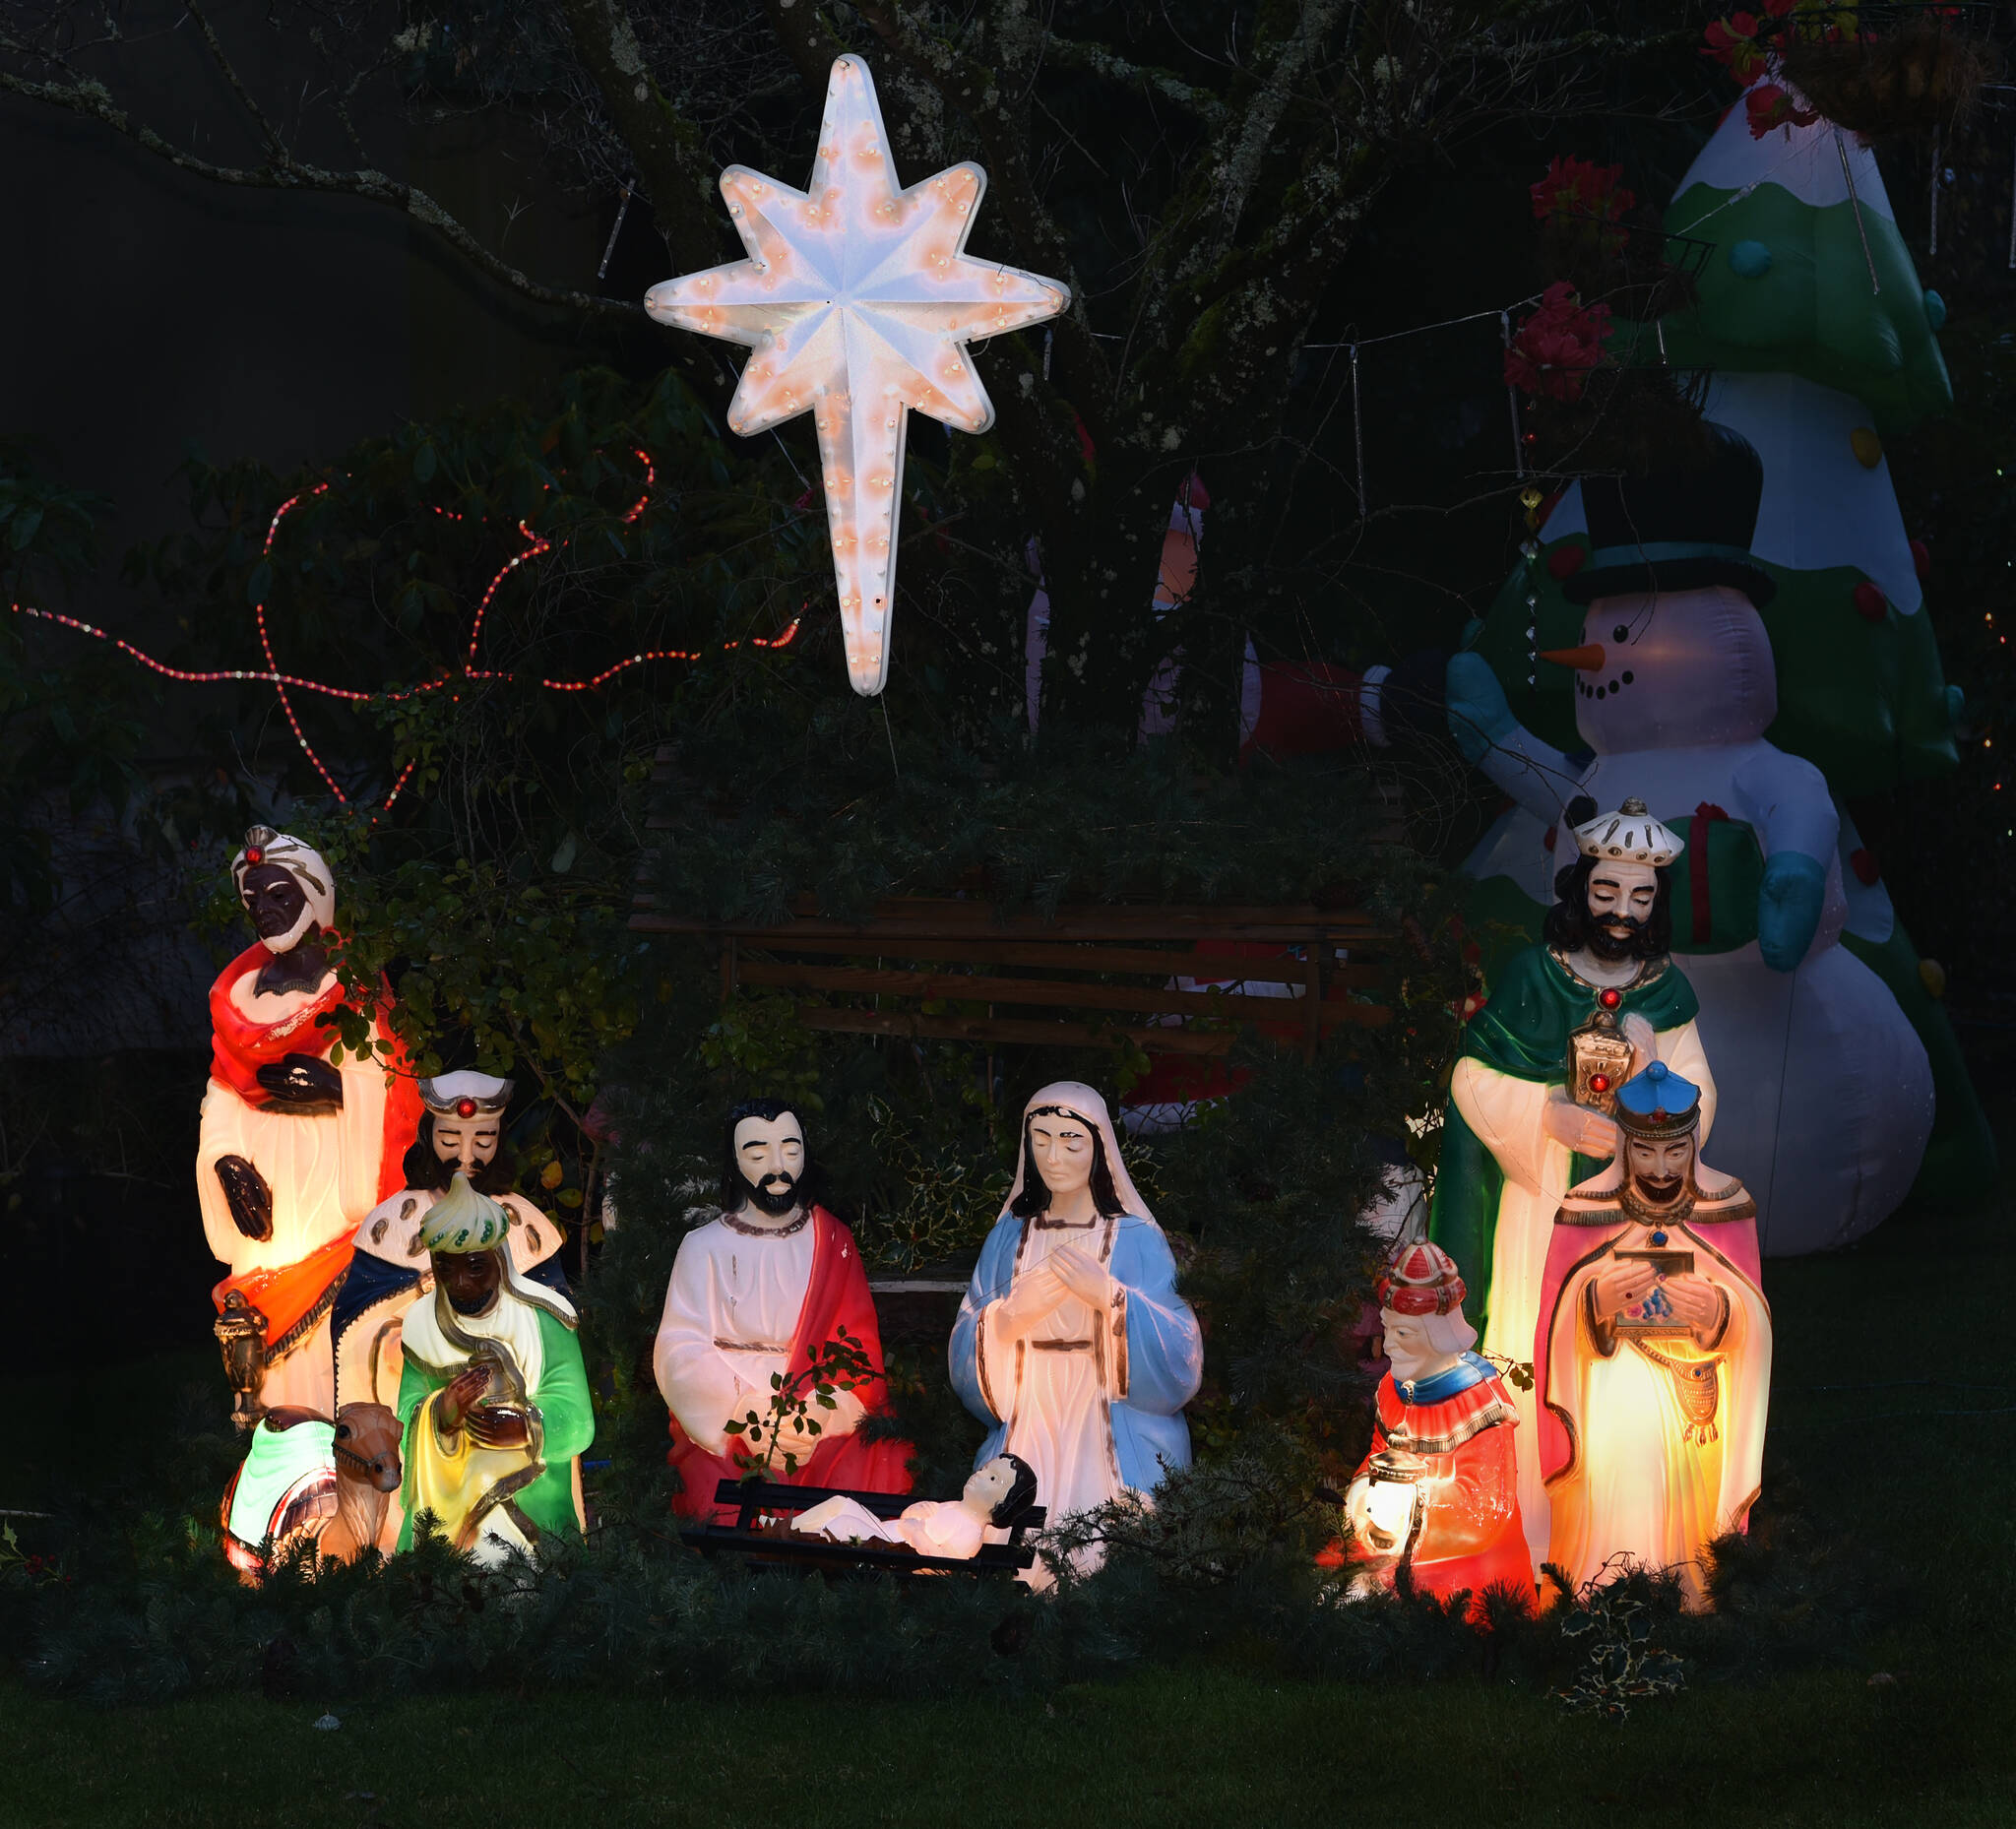 This antique nativity set with guiding star is West's favorite section of the light display, which has been drawing visitors to her house for more than half a century.